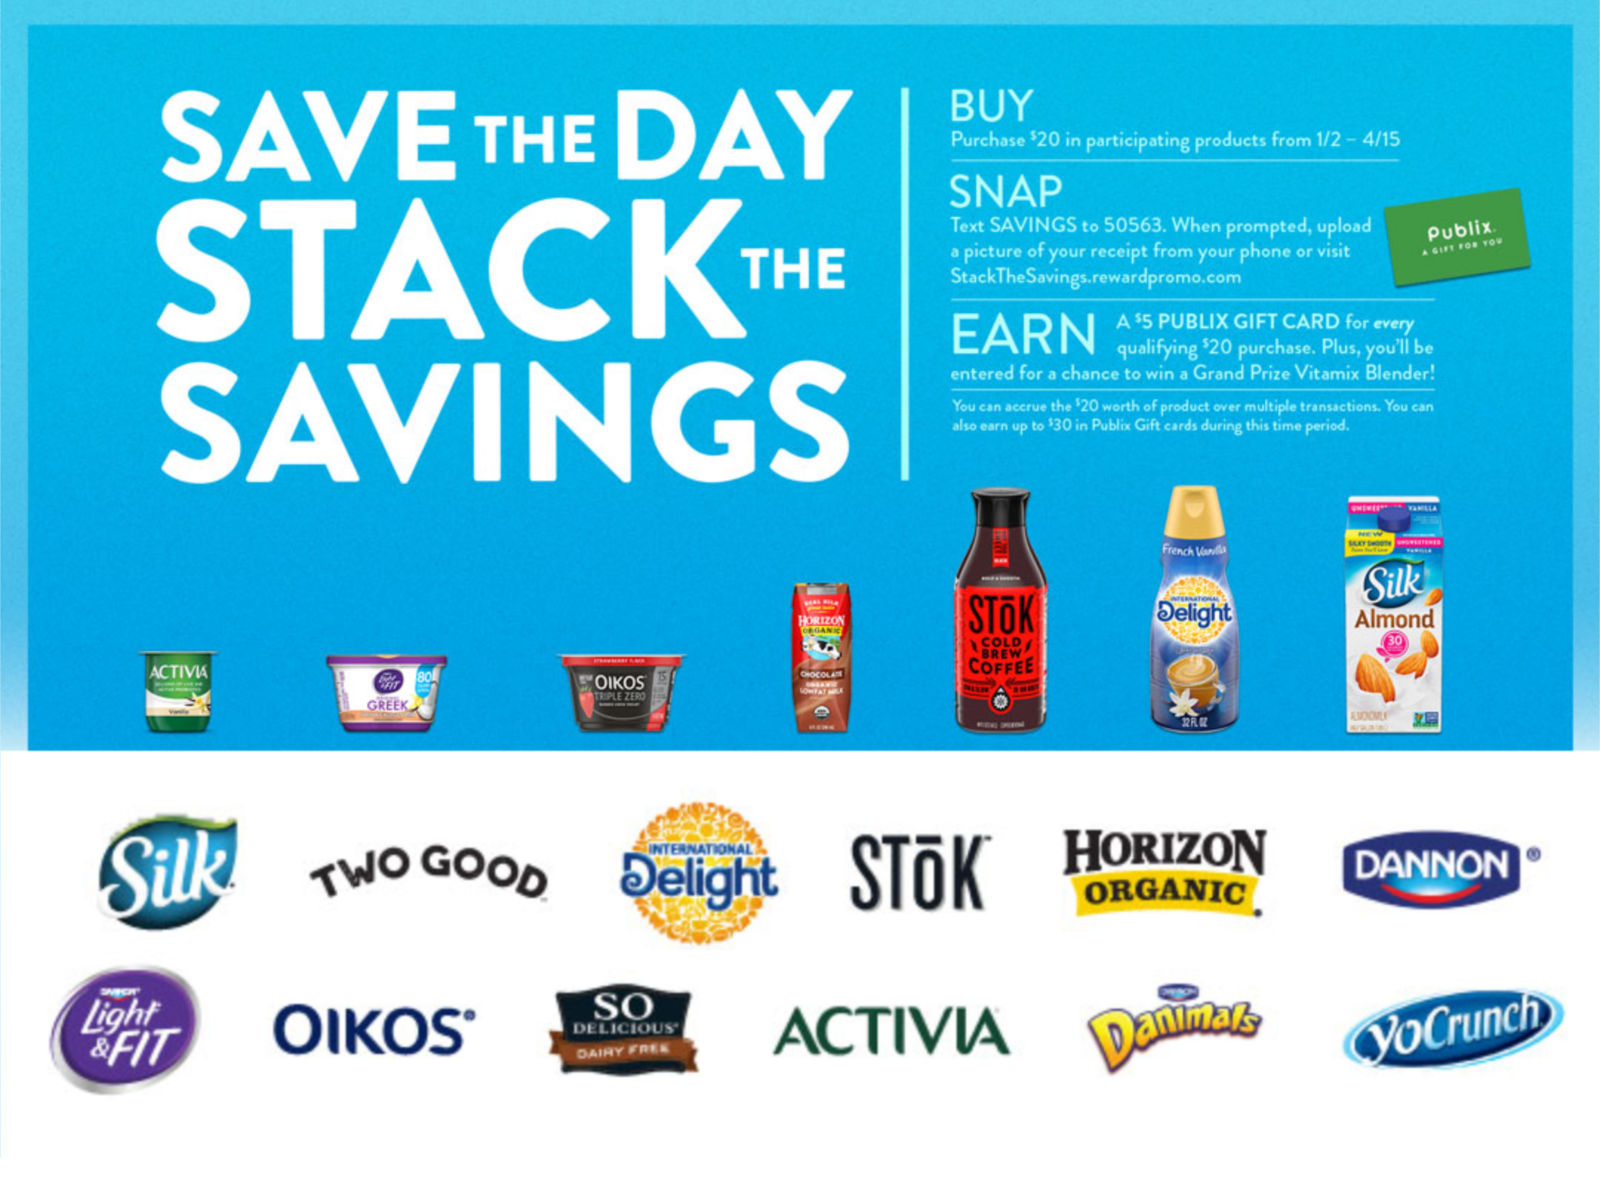 Still Time To Earn Gift Cards With Stack The Savings Rebate!